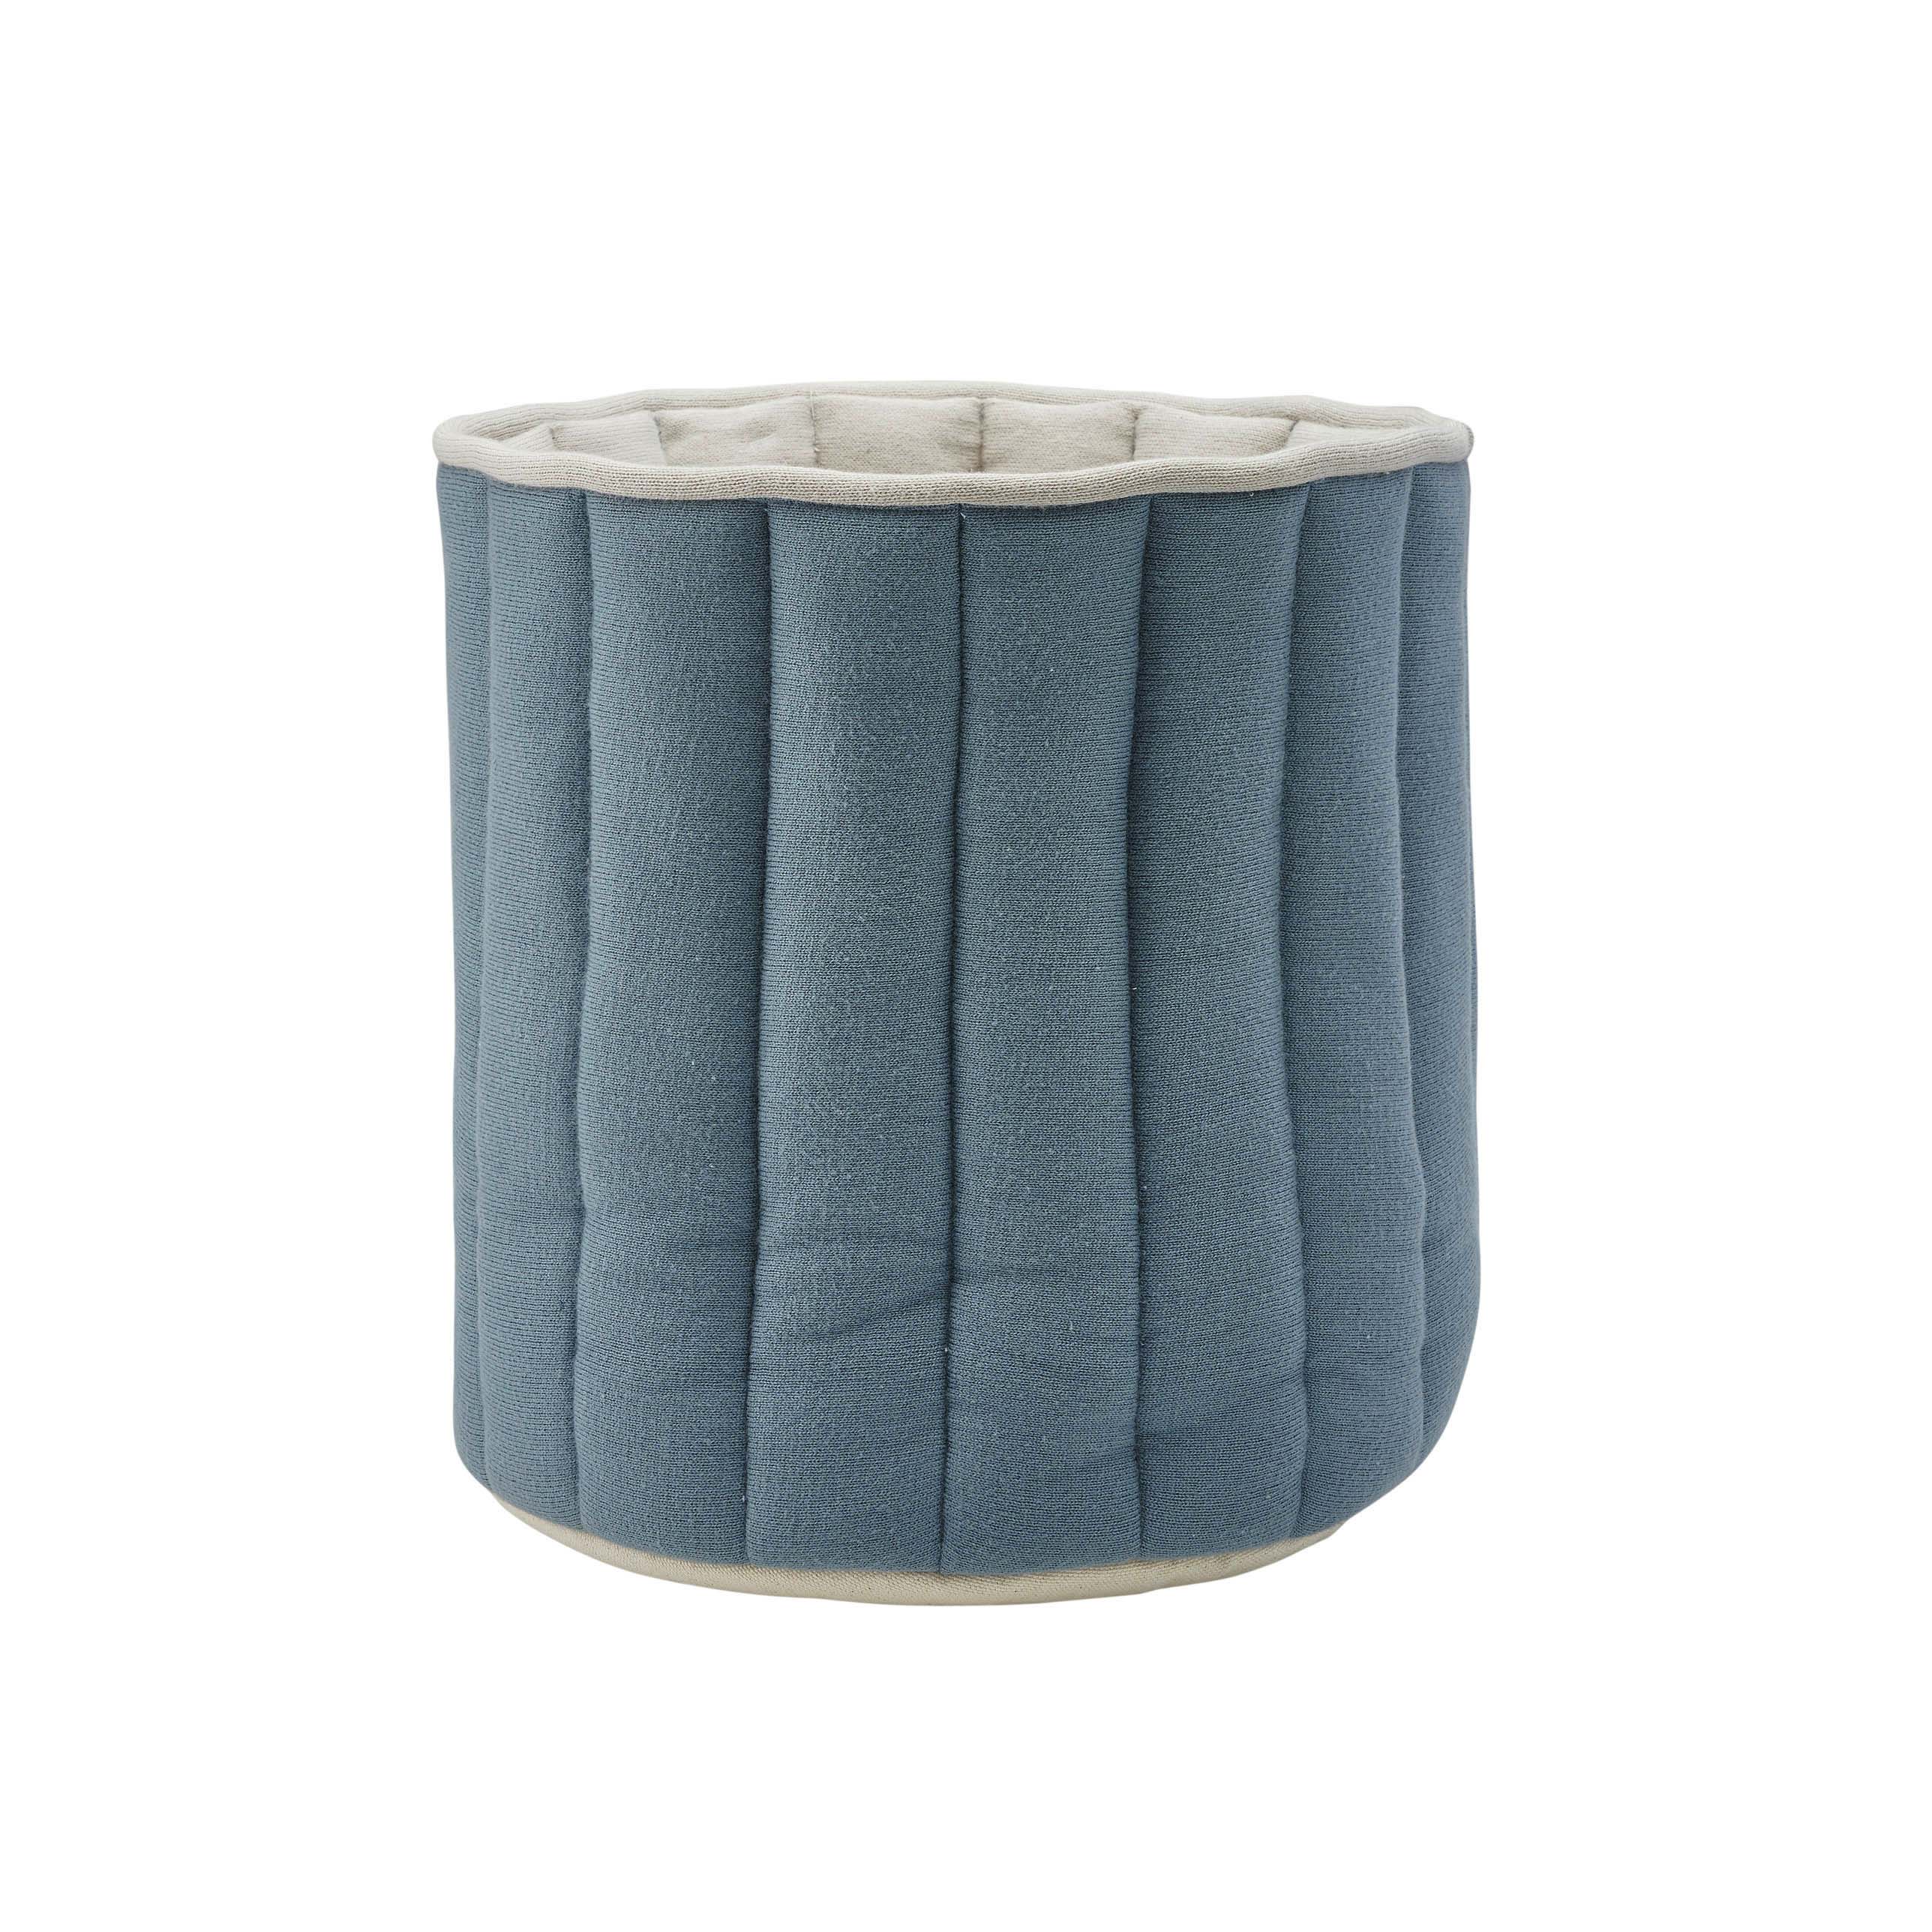 Knitted Storage Basket - Small Ocean Blue - Avery Row